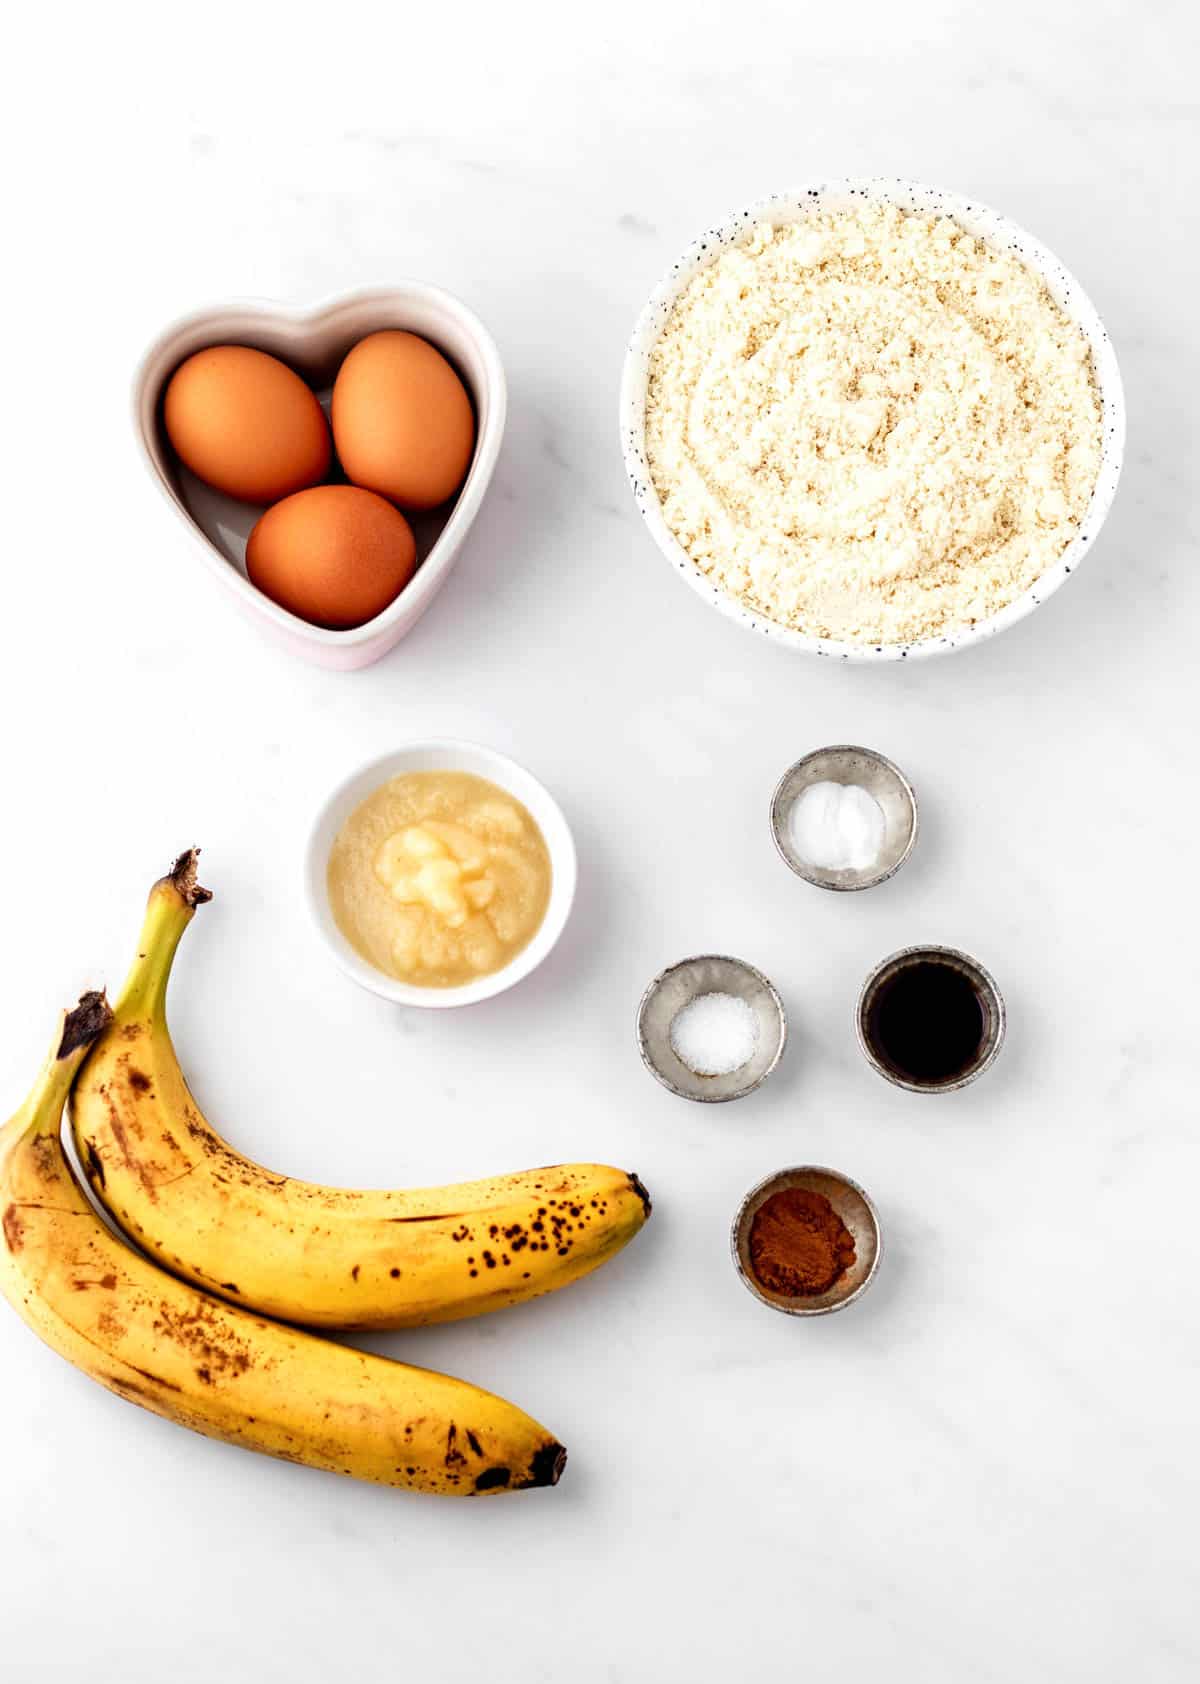 Ingredients for baby banana bread recipe.